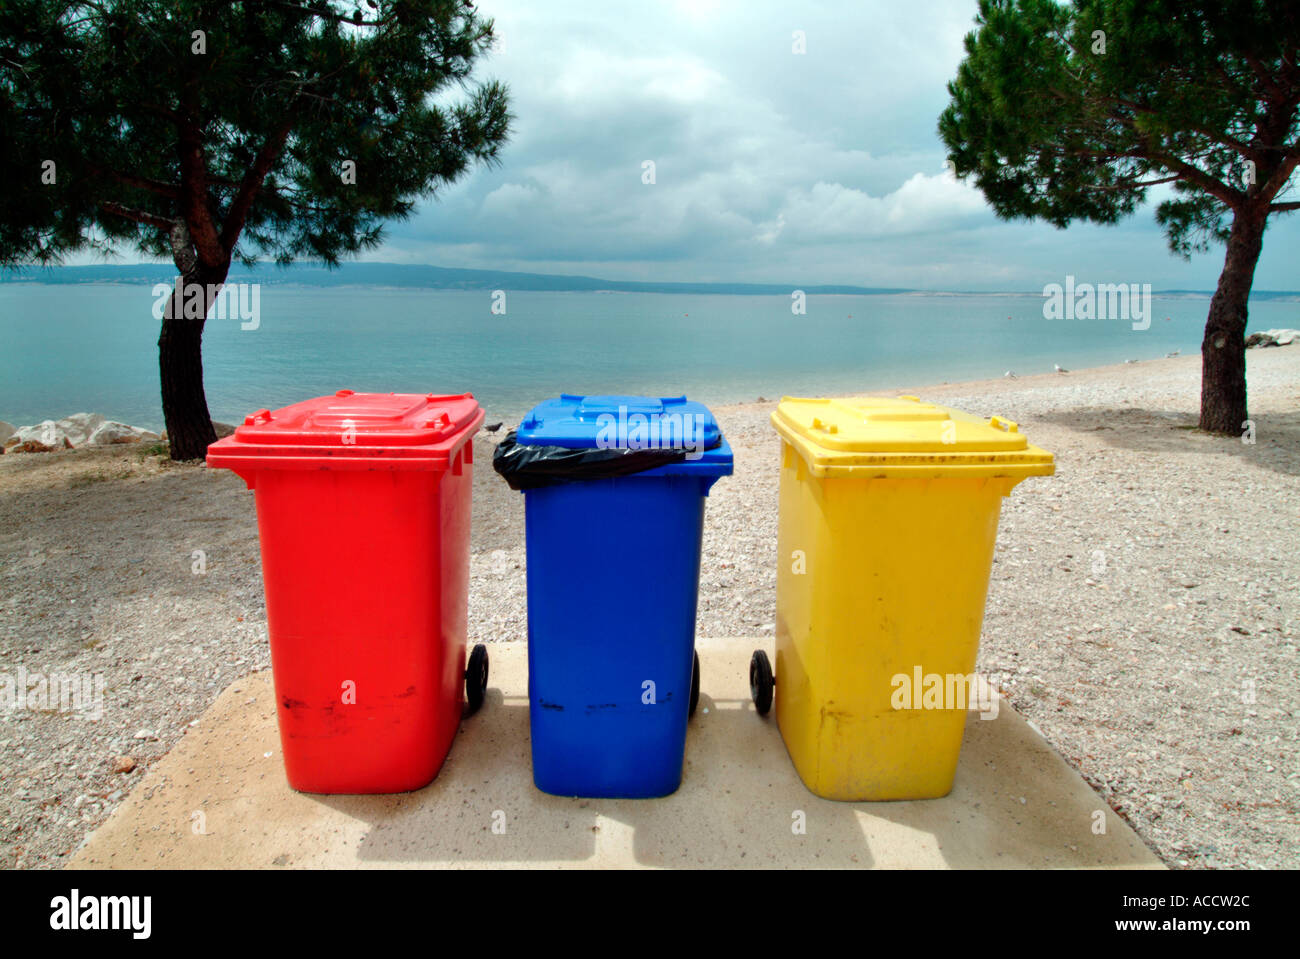 yellow red and blue dustbin on a beach Stock Photo